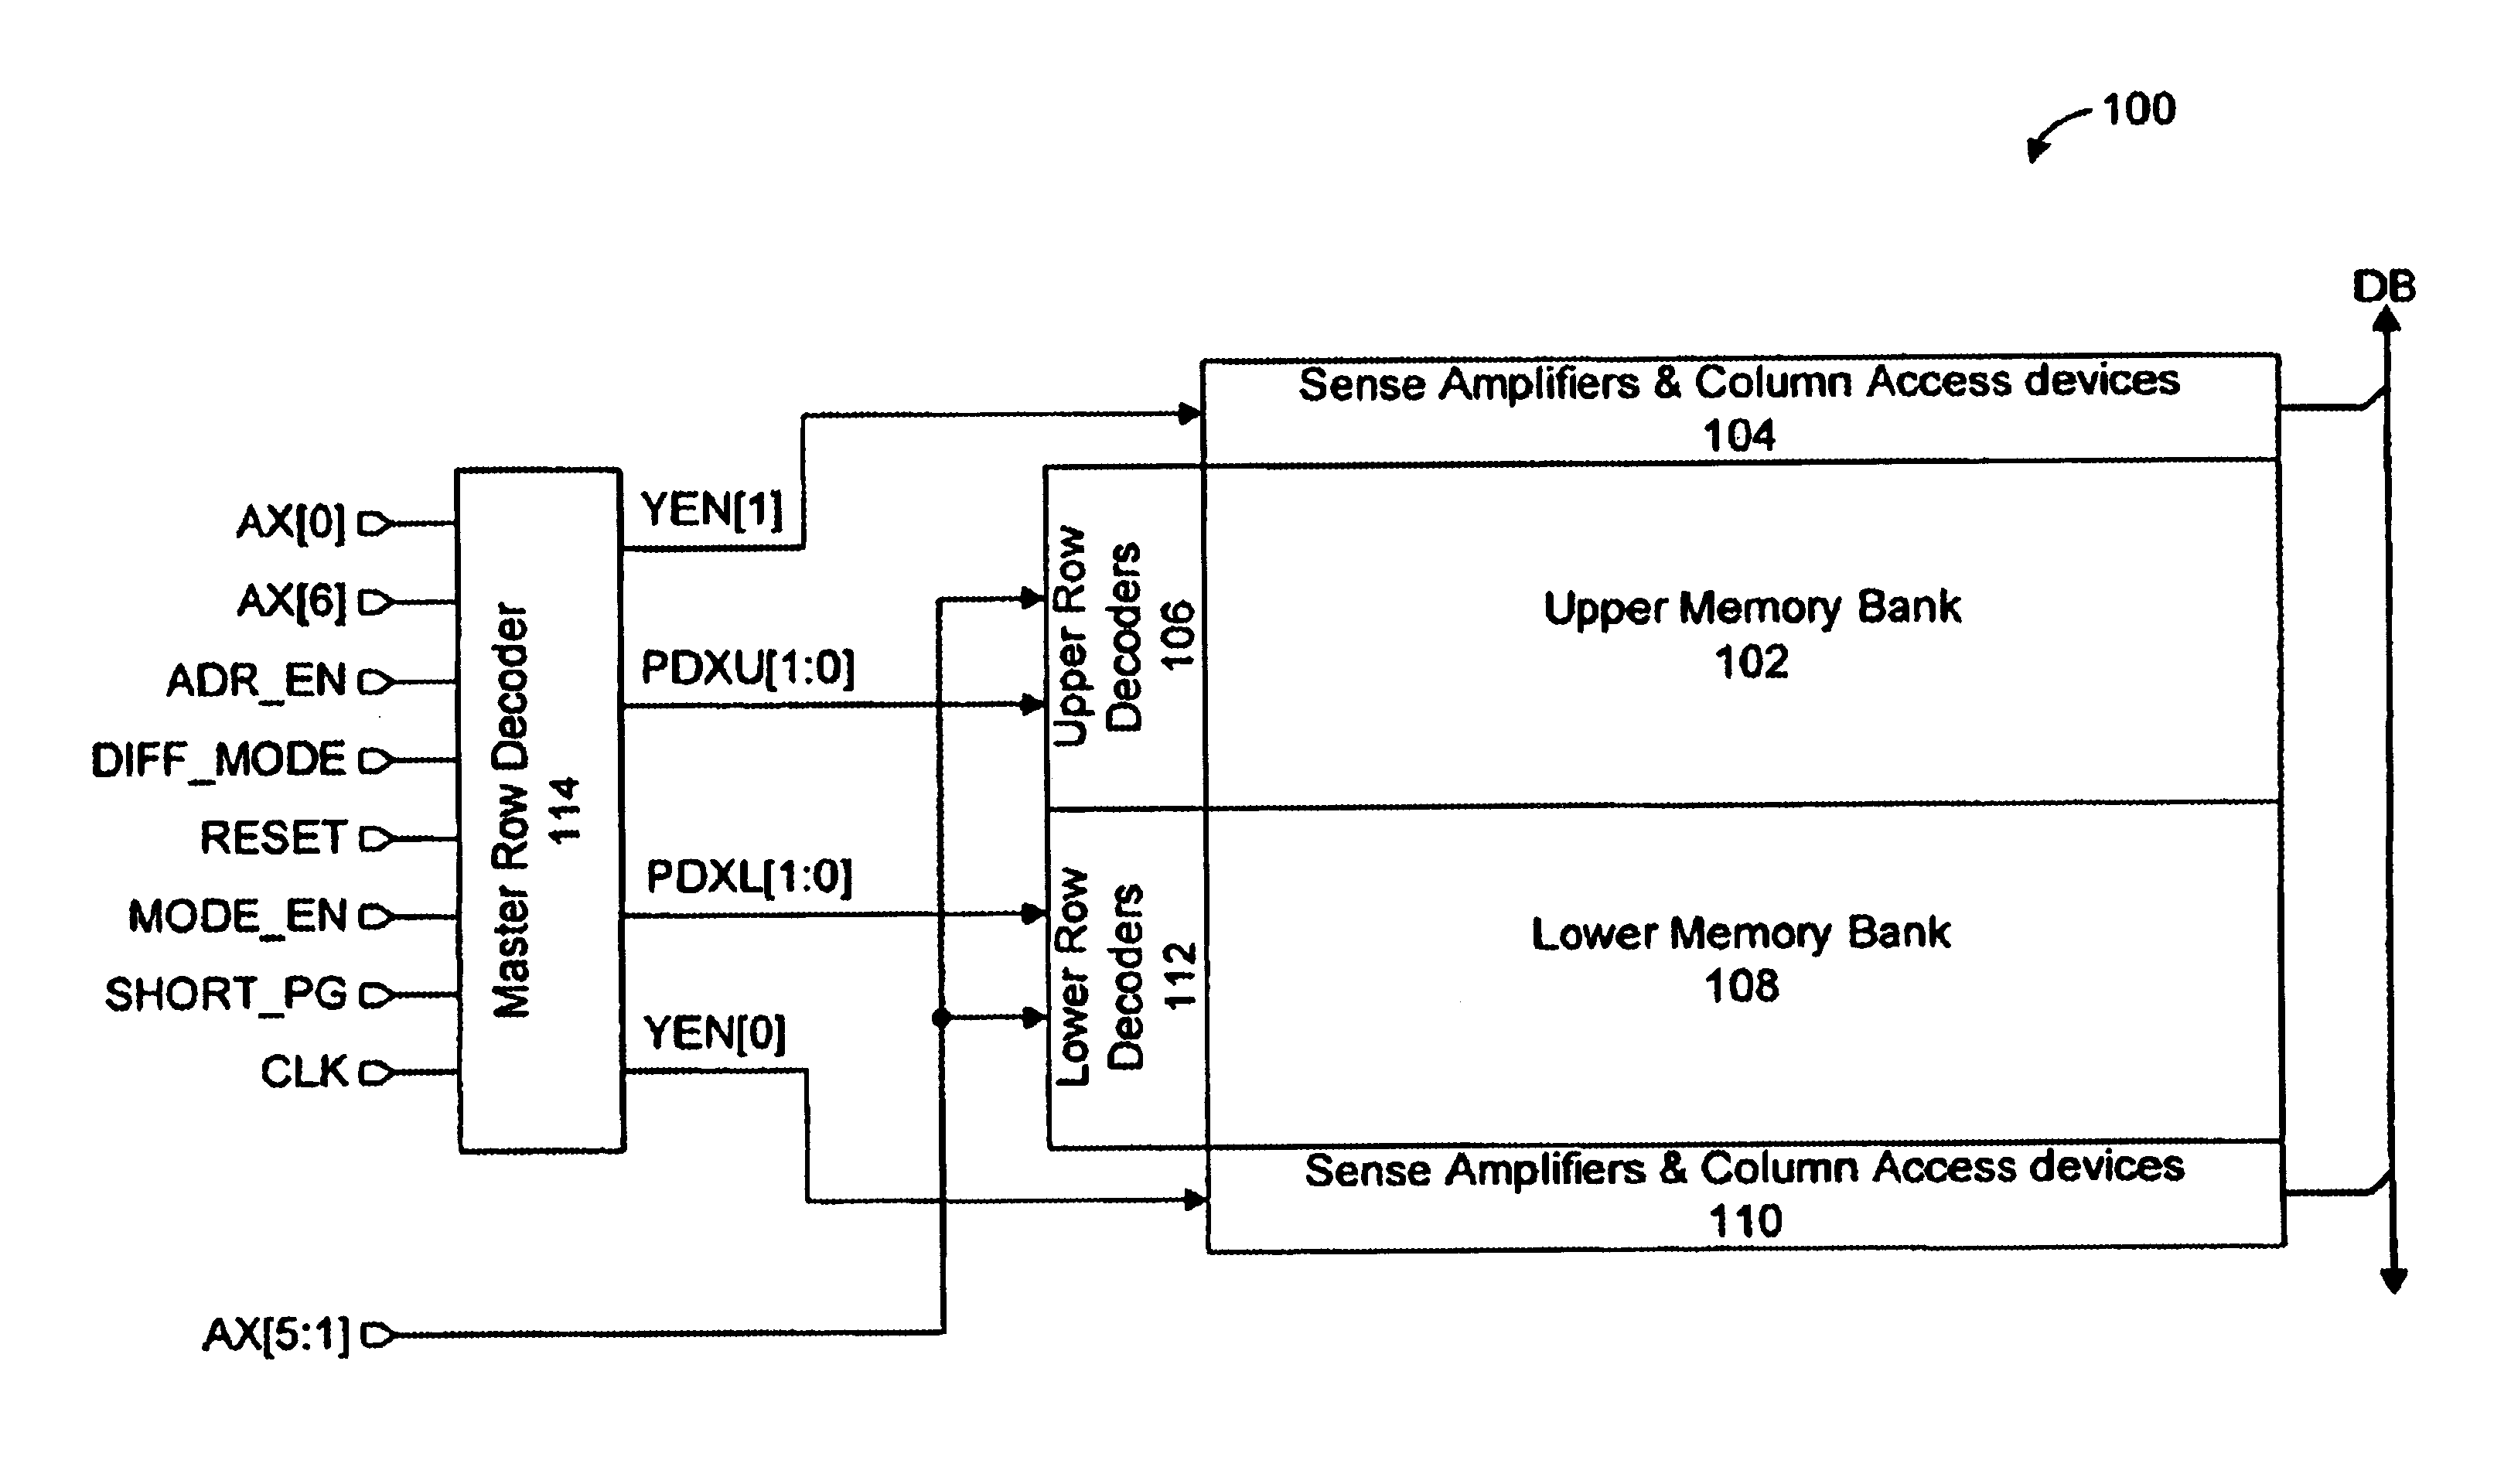 RAM having dynamically switchable access modes